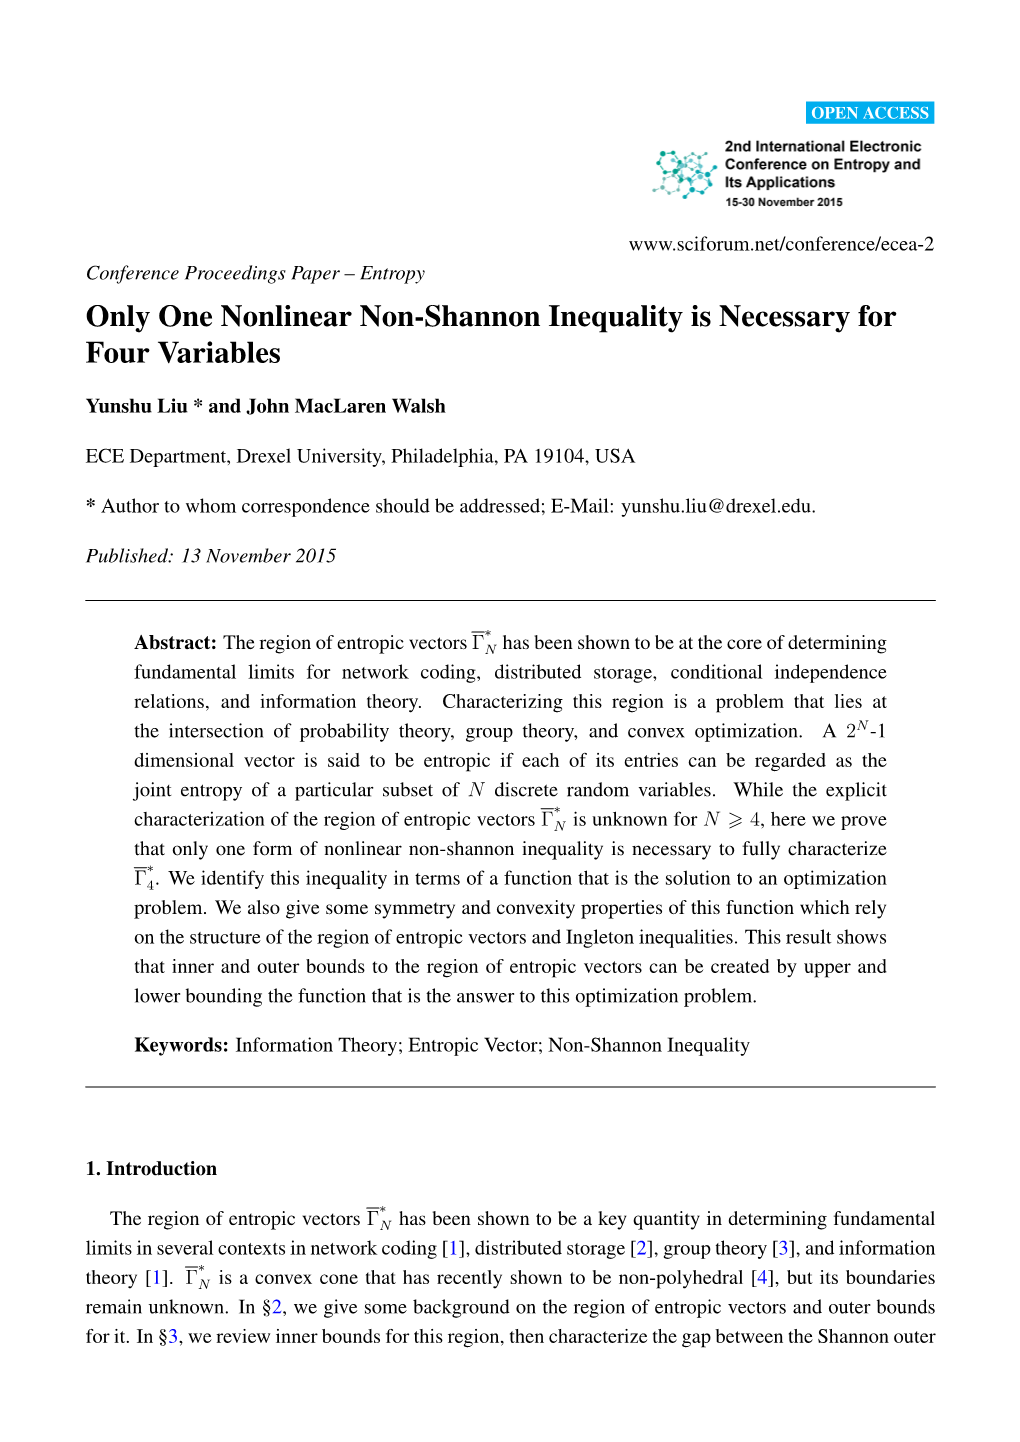 Only One Nonlinear Non-Shannon Inequality Is Necessary for Four Variables